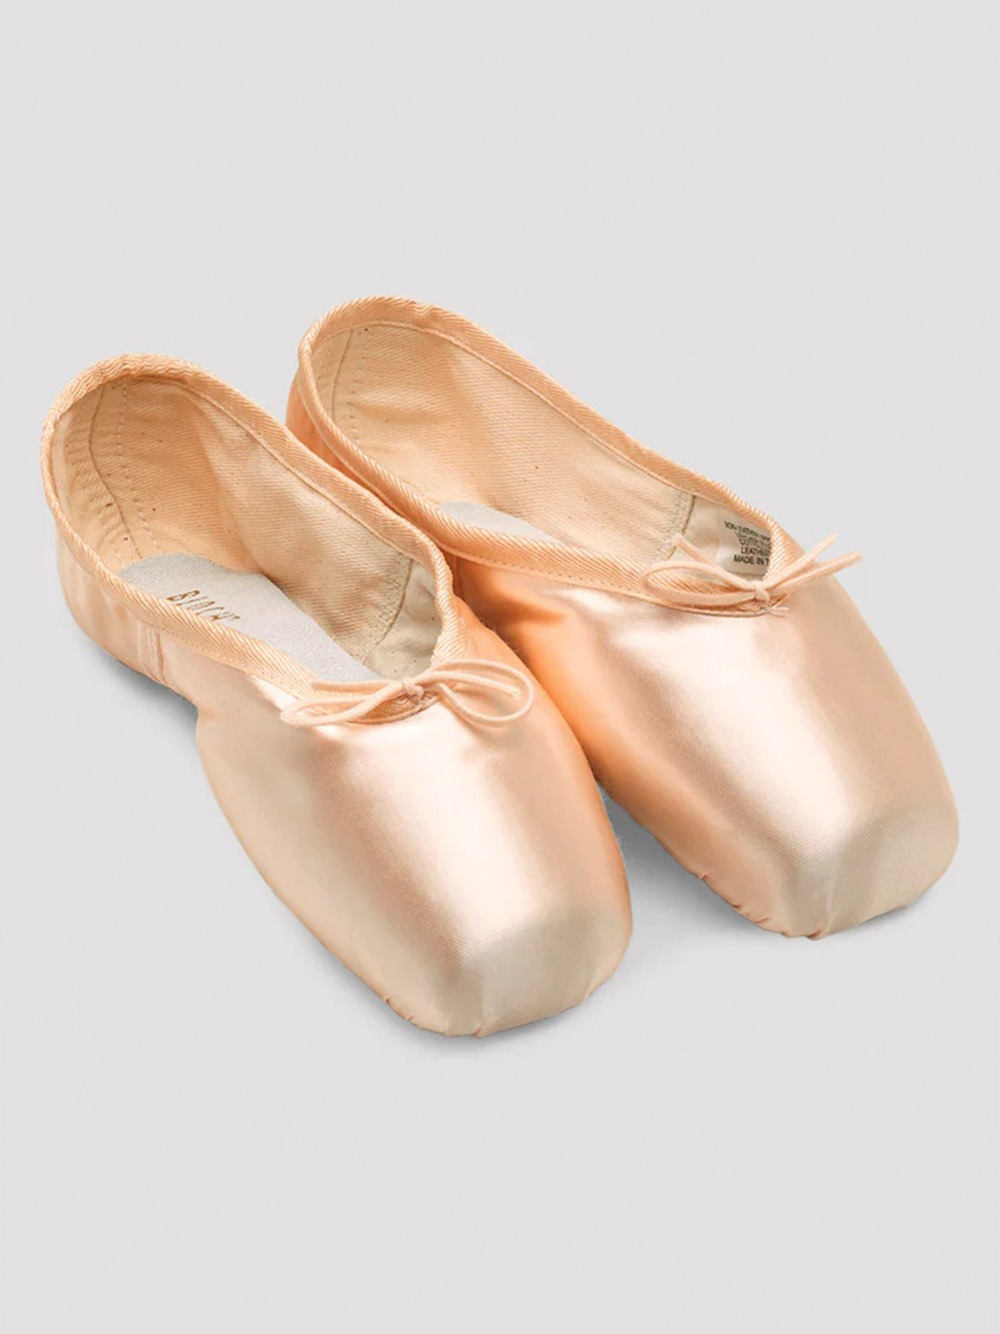 HERITAGE POINTE SHOES